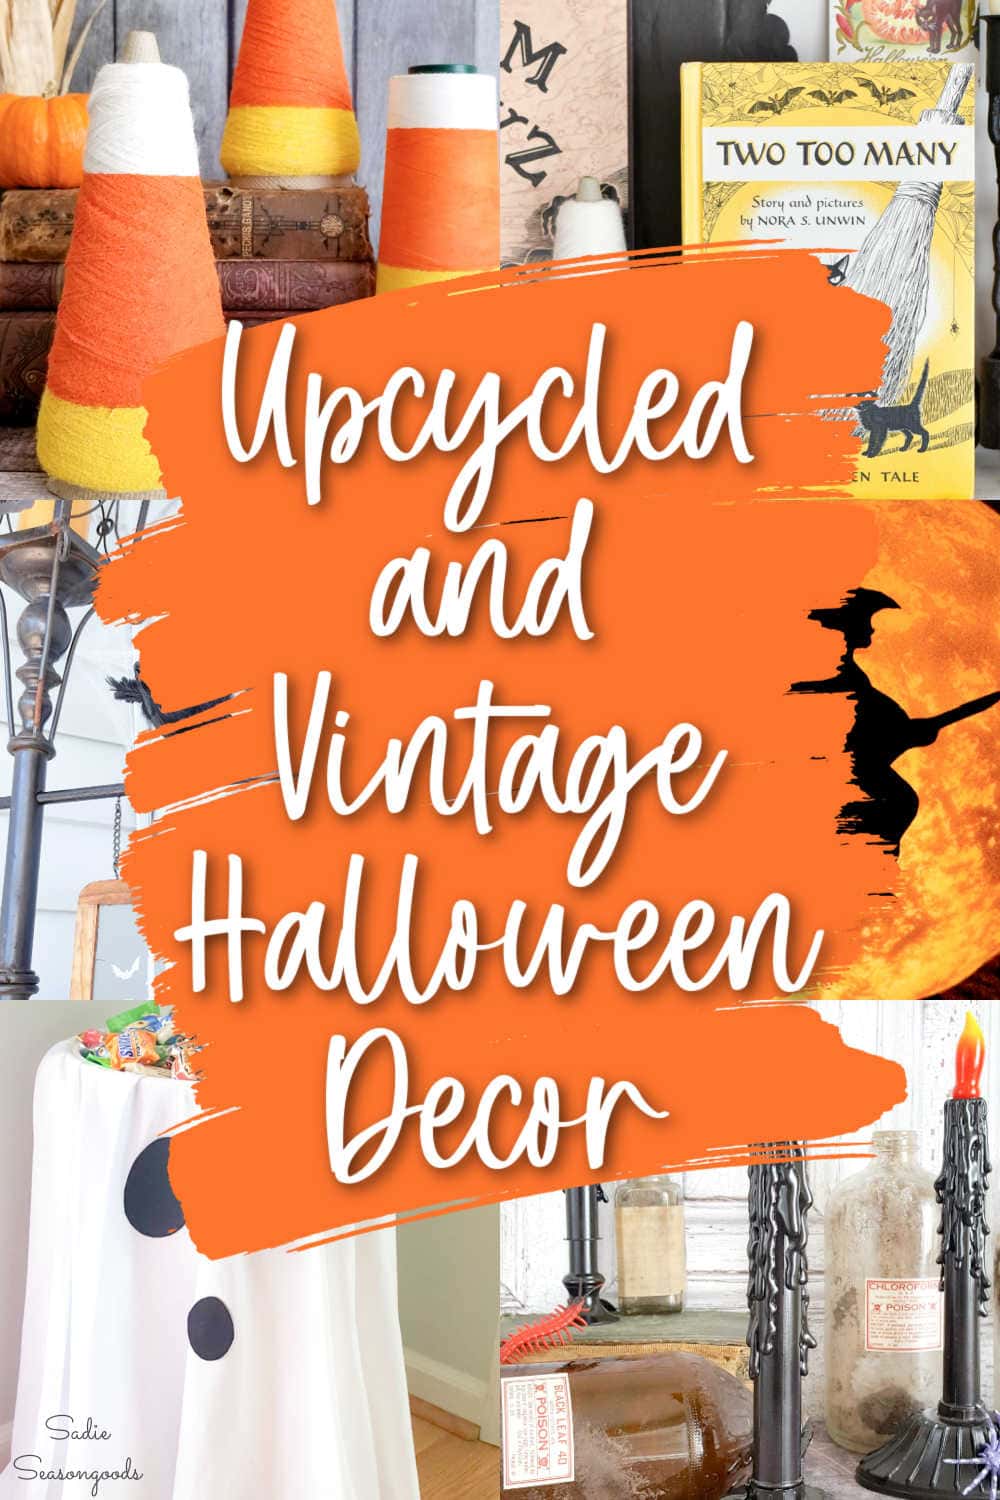 vintage style halloween decor that is upcycled